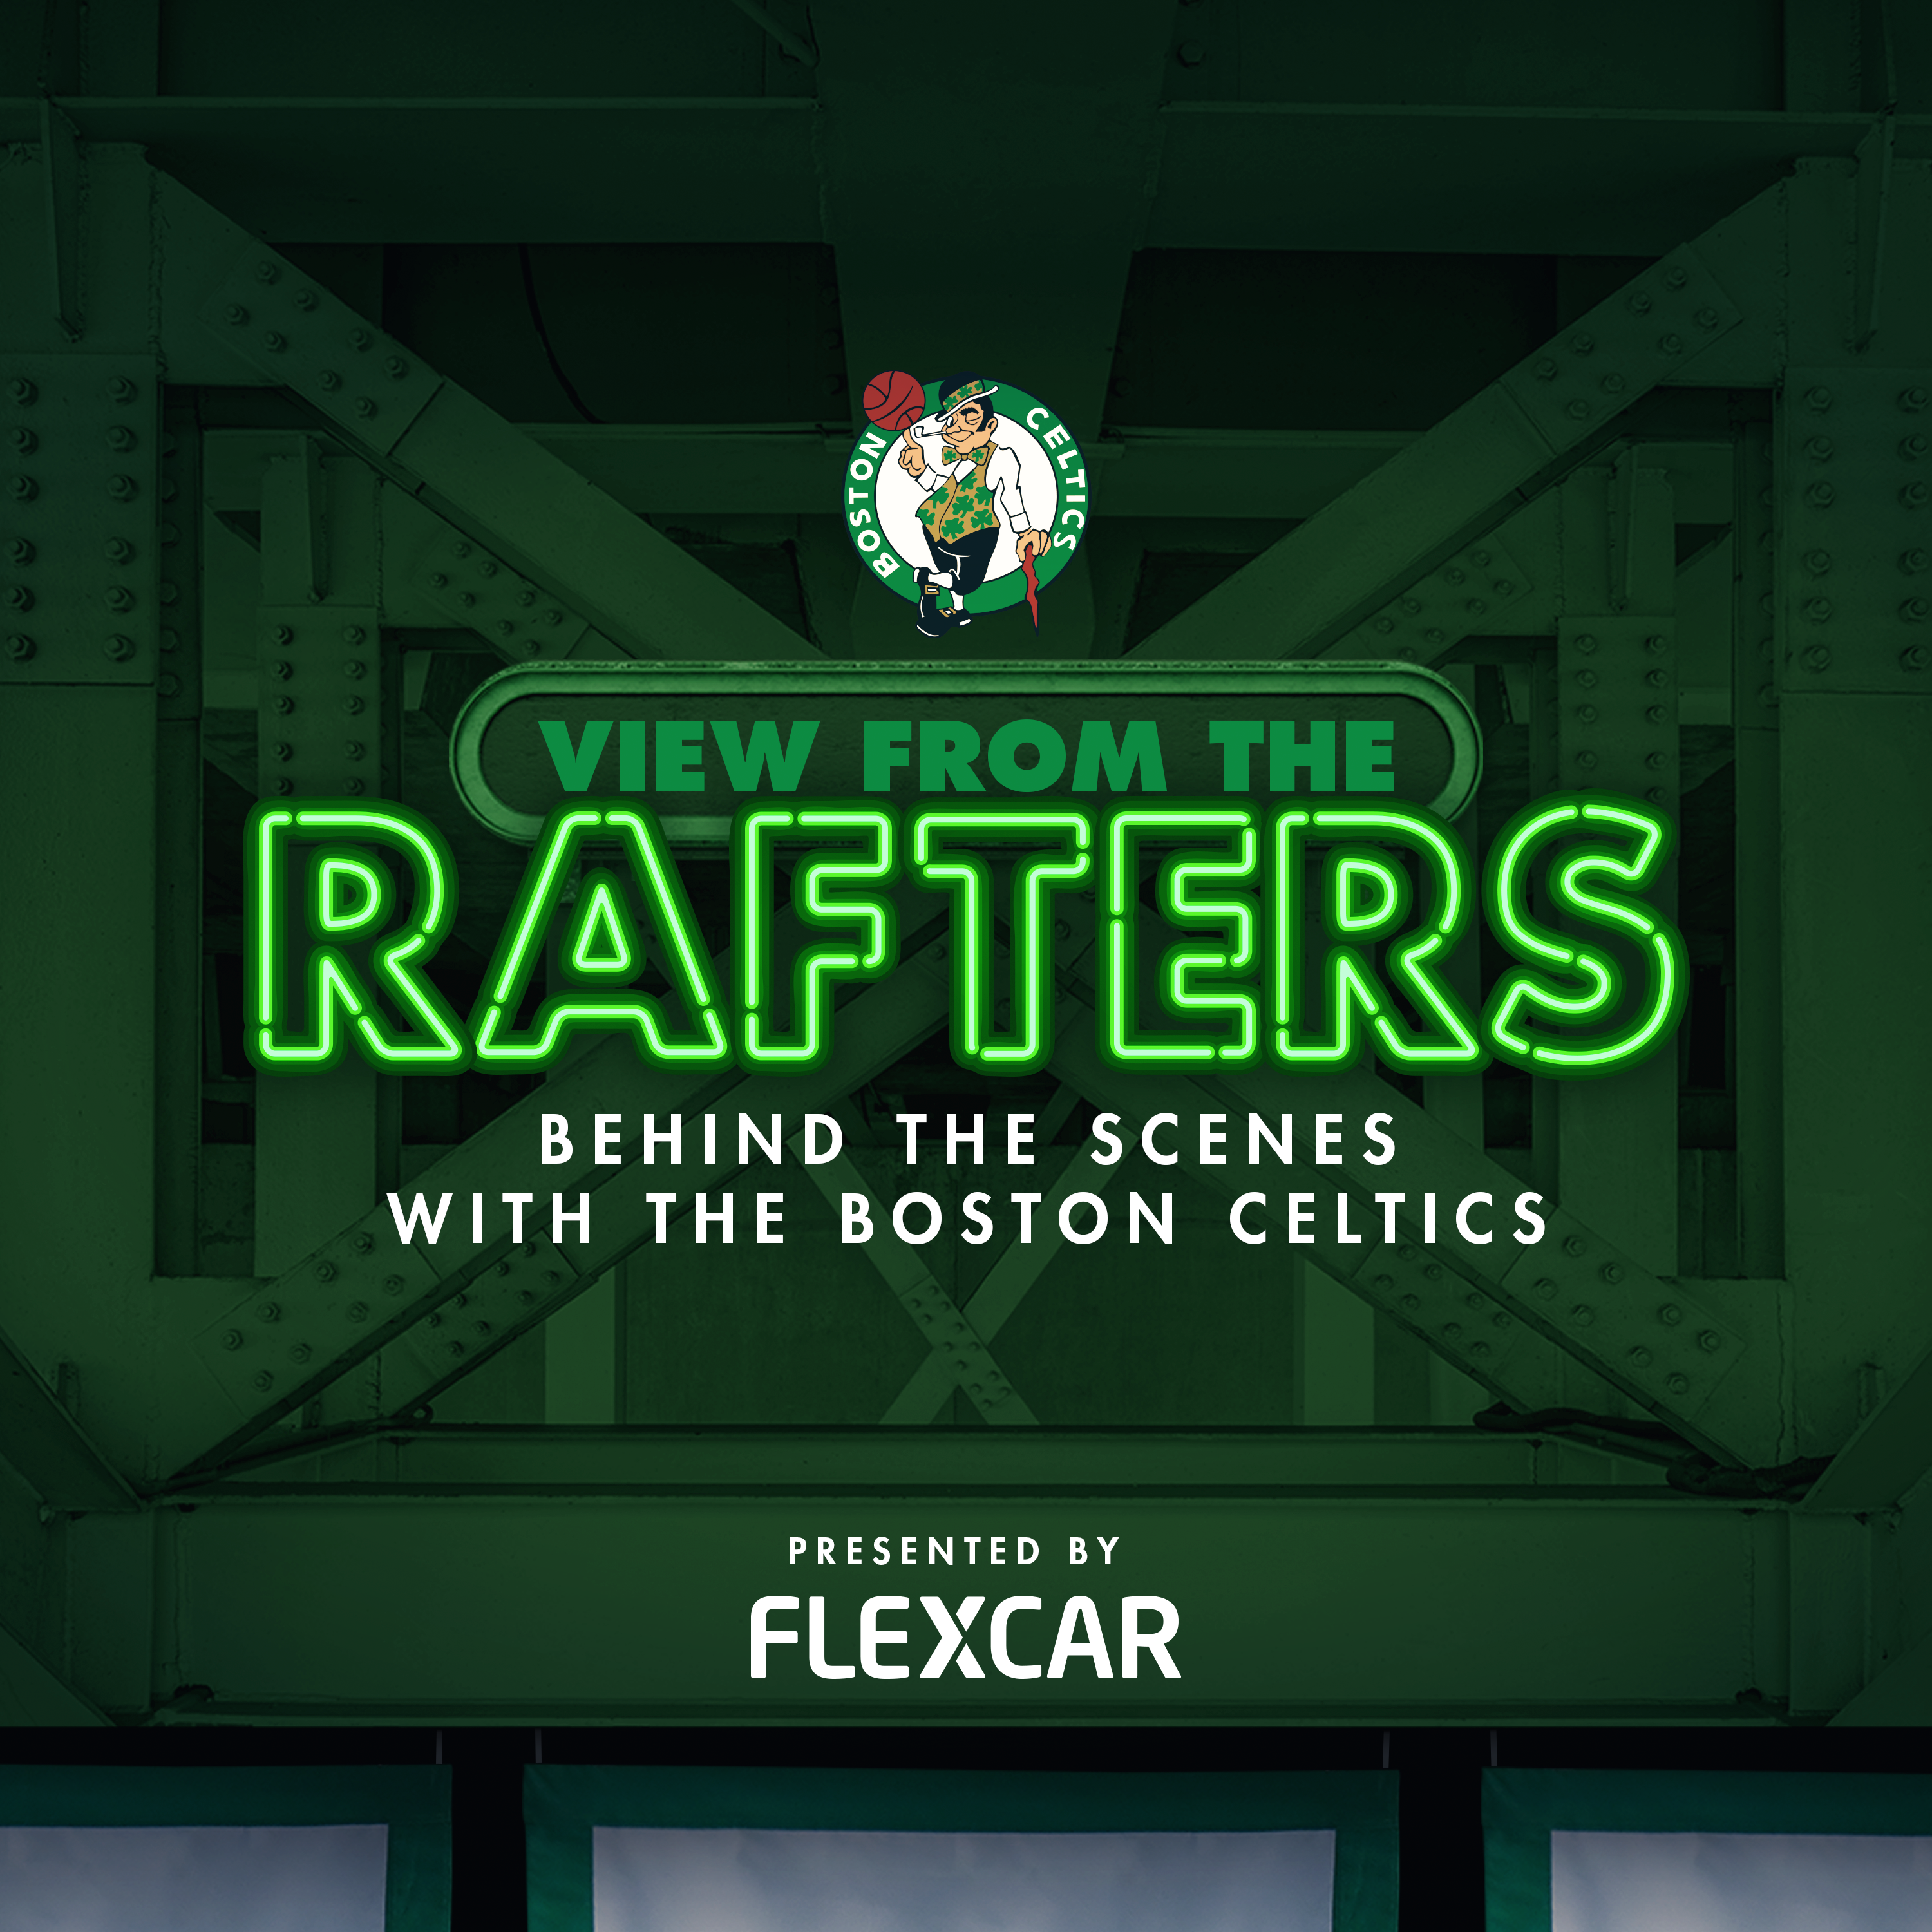 View From The Rafters: Behind the Scenes with the Boston Celtics